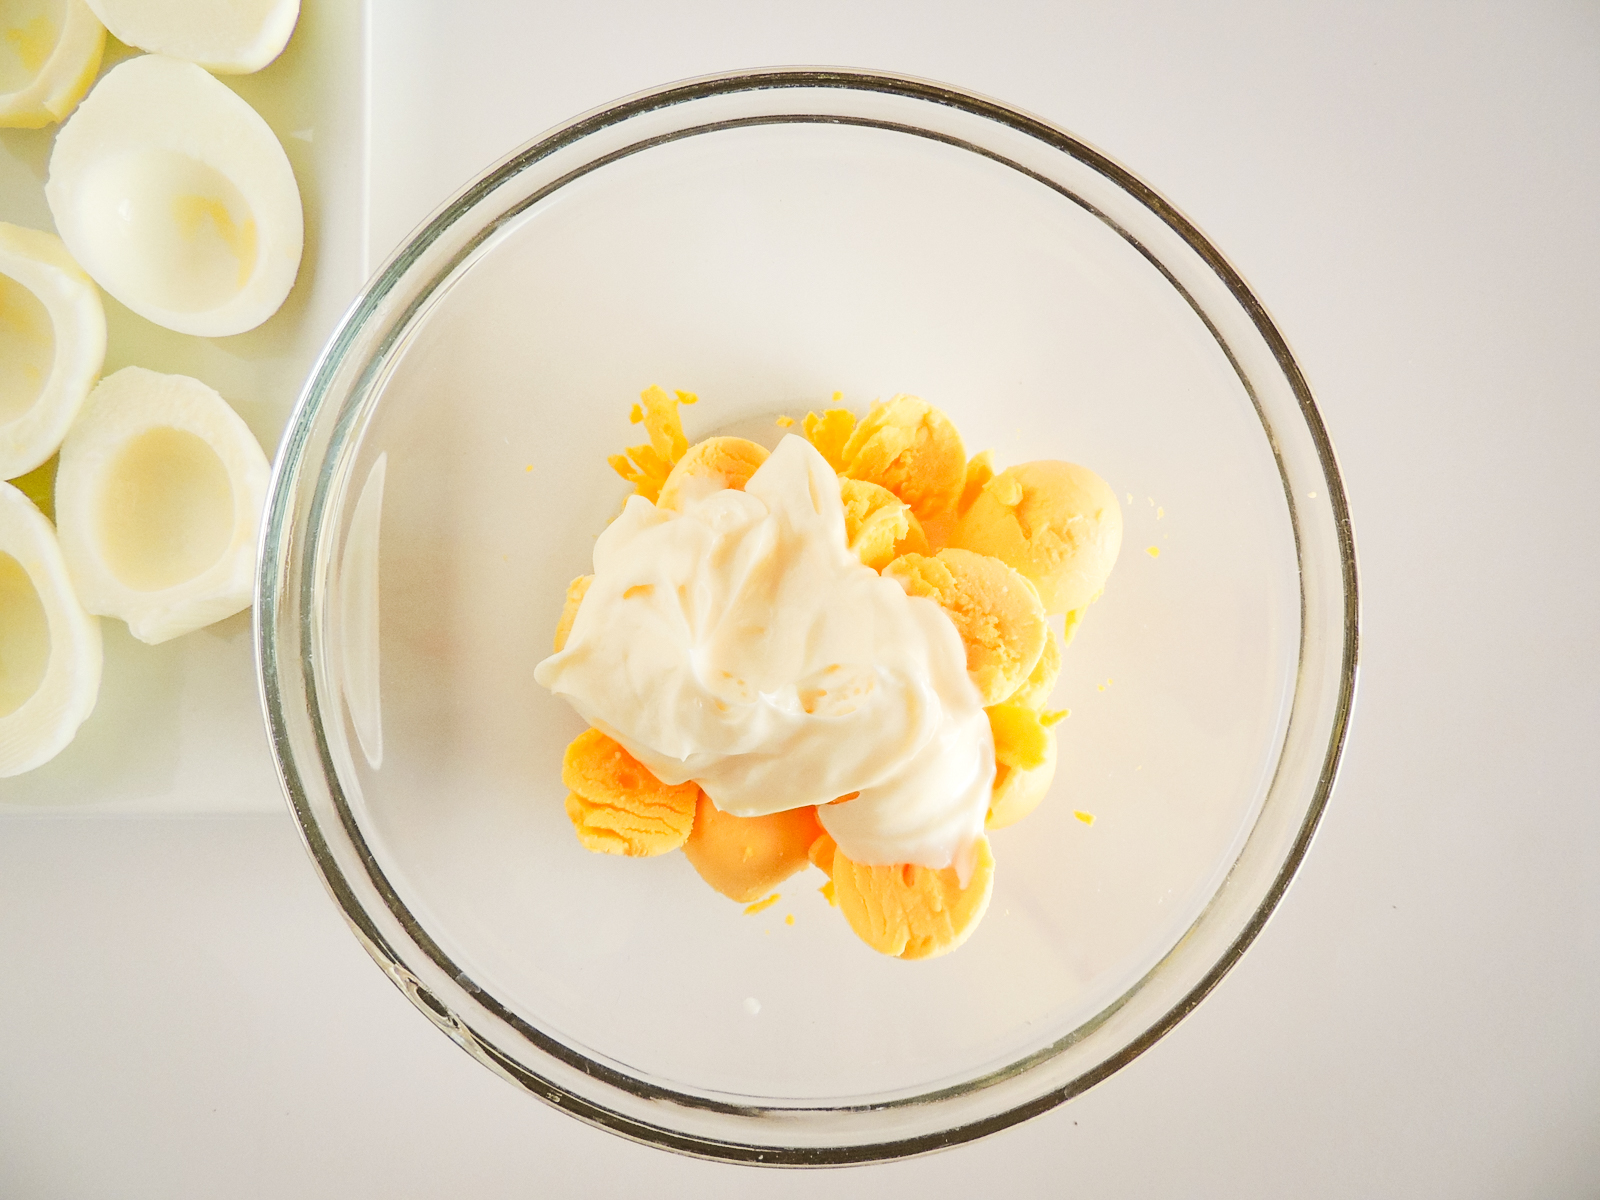 A glass bowl filled with egg yolks and mayonnaise.